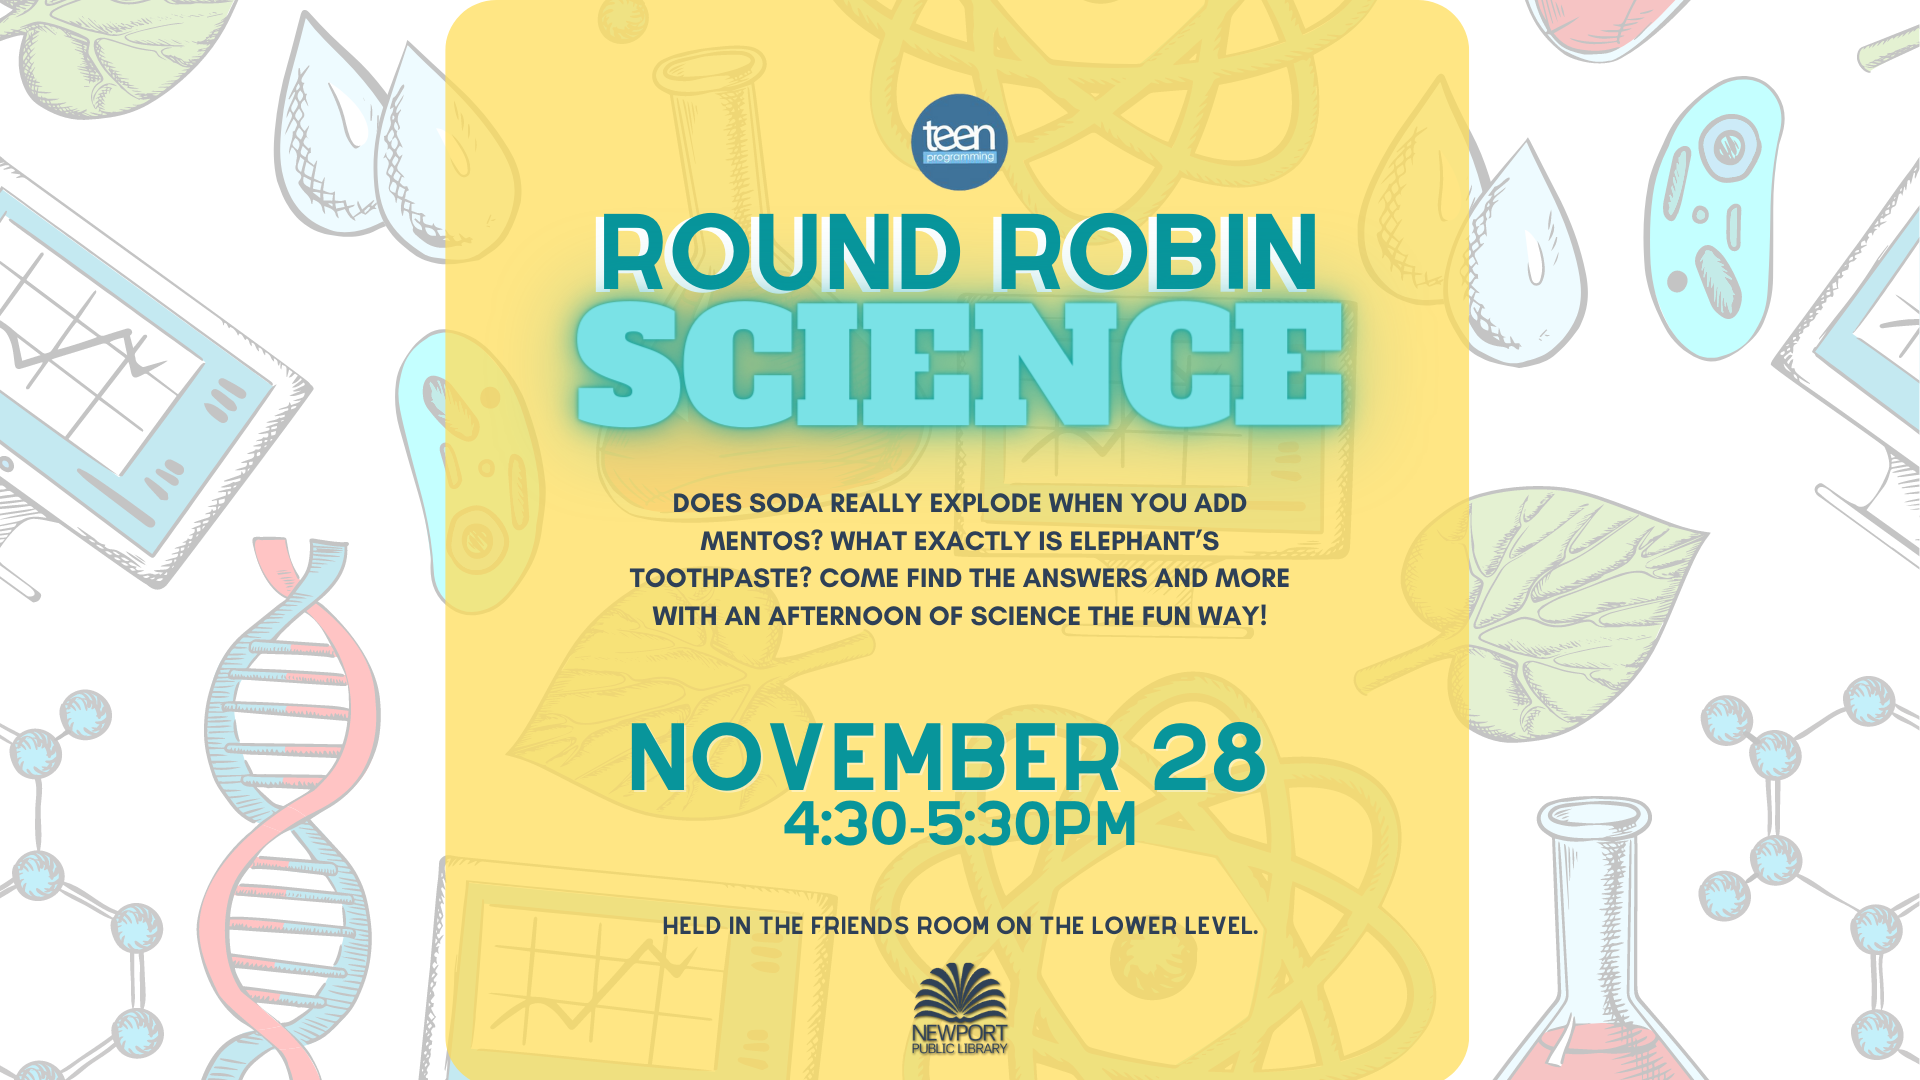 Round Robin Science for Teens!  Monday, November 28th at 3:45p